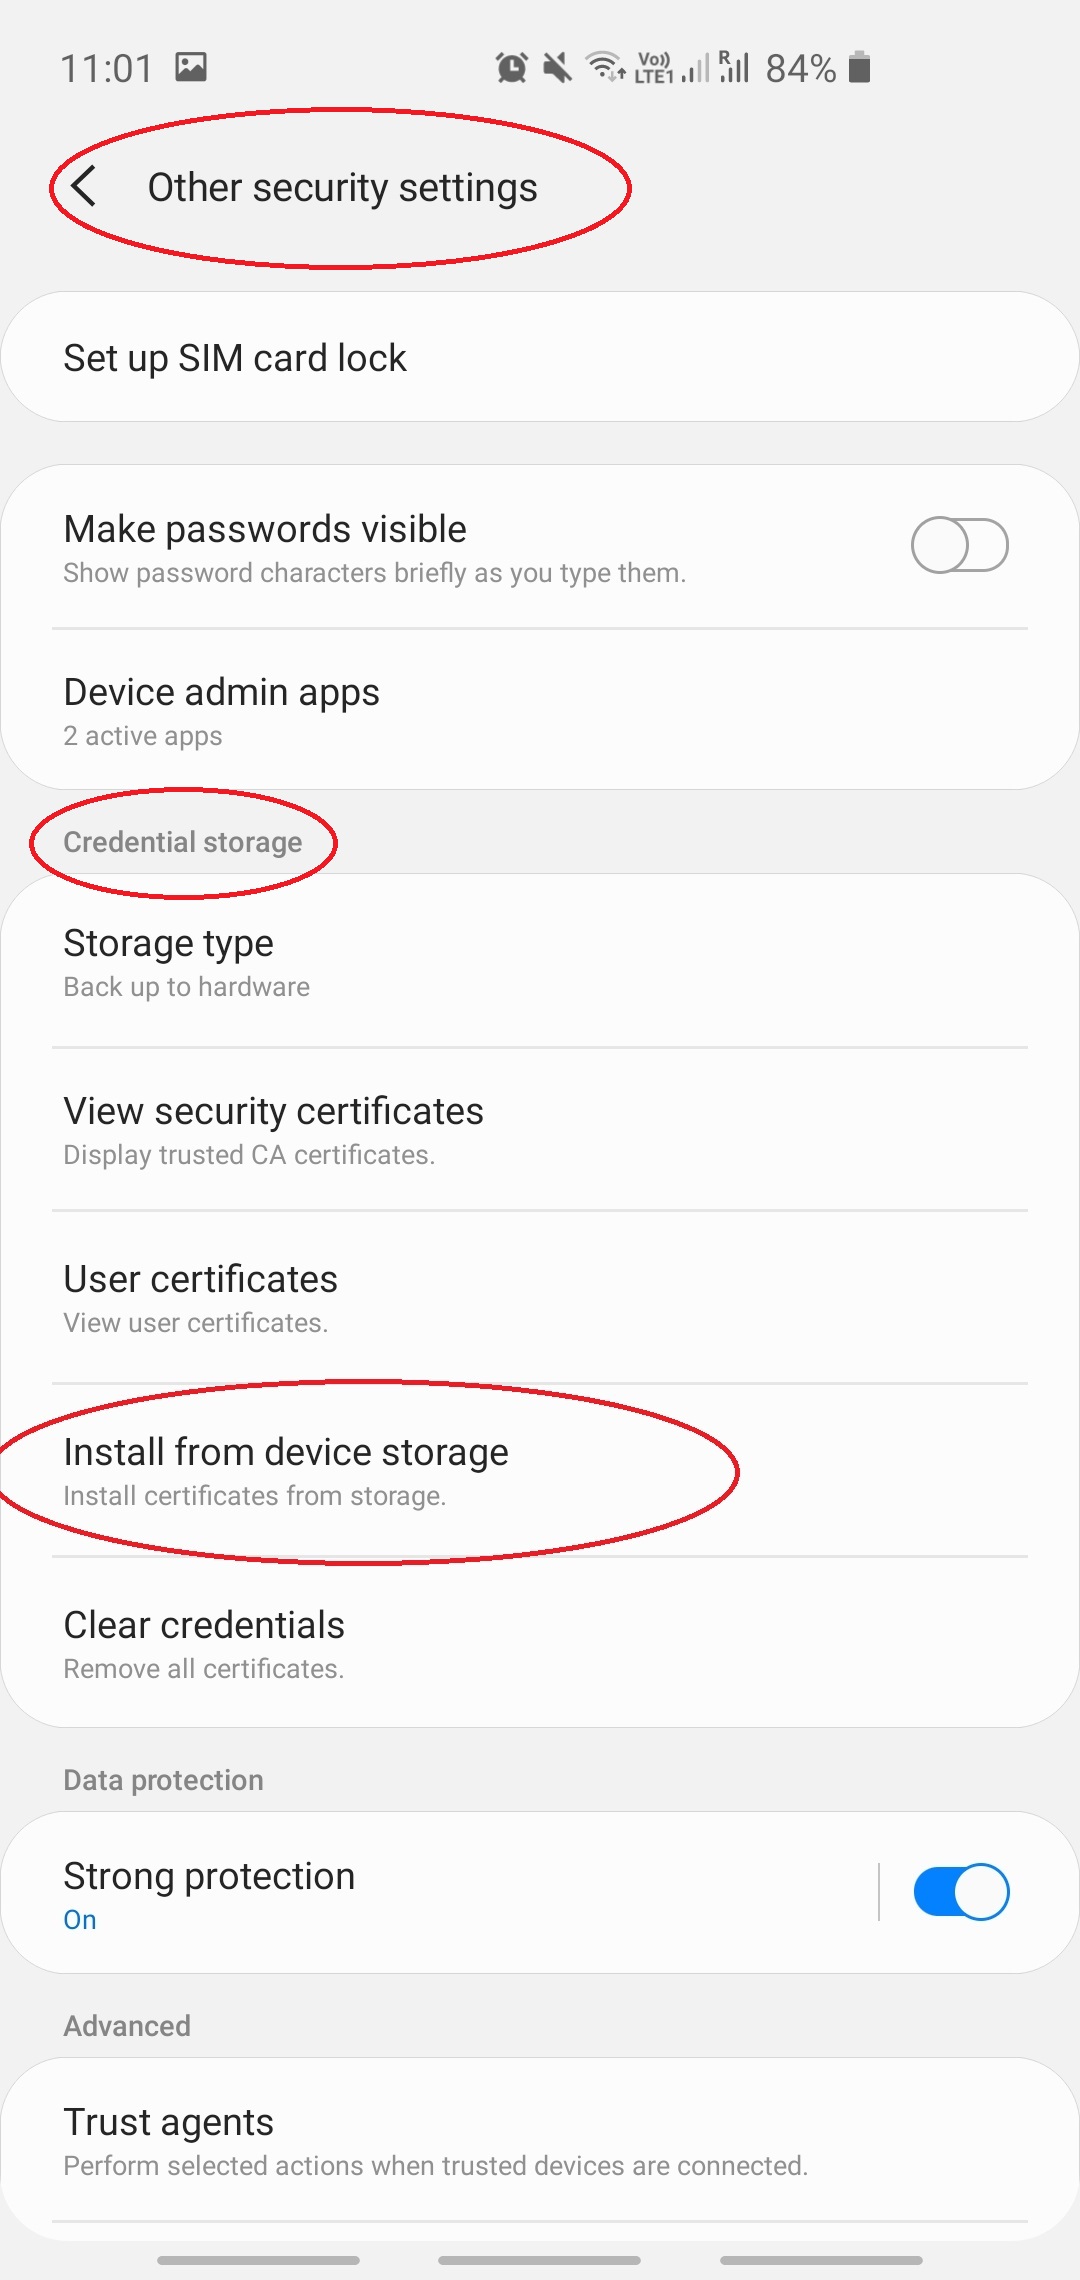 Install from device storage